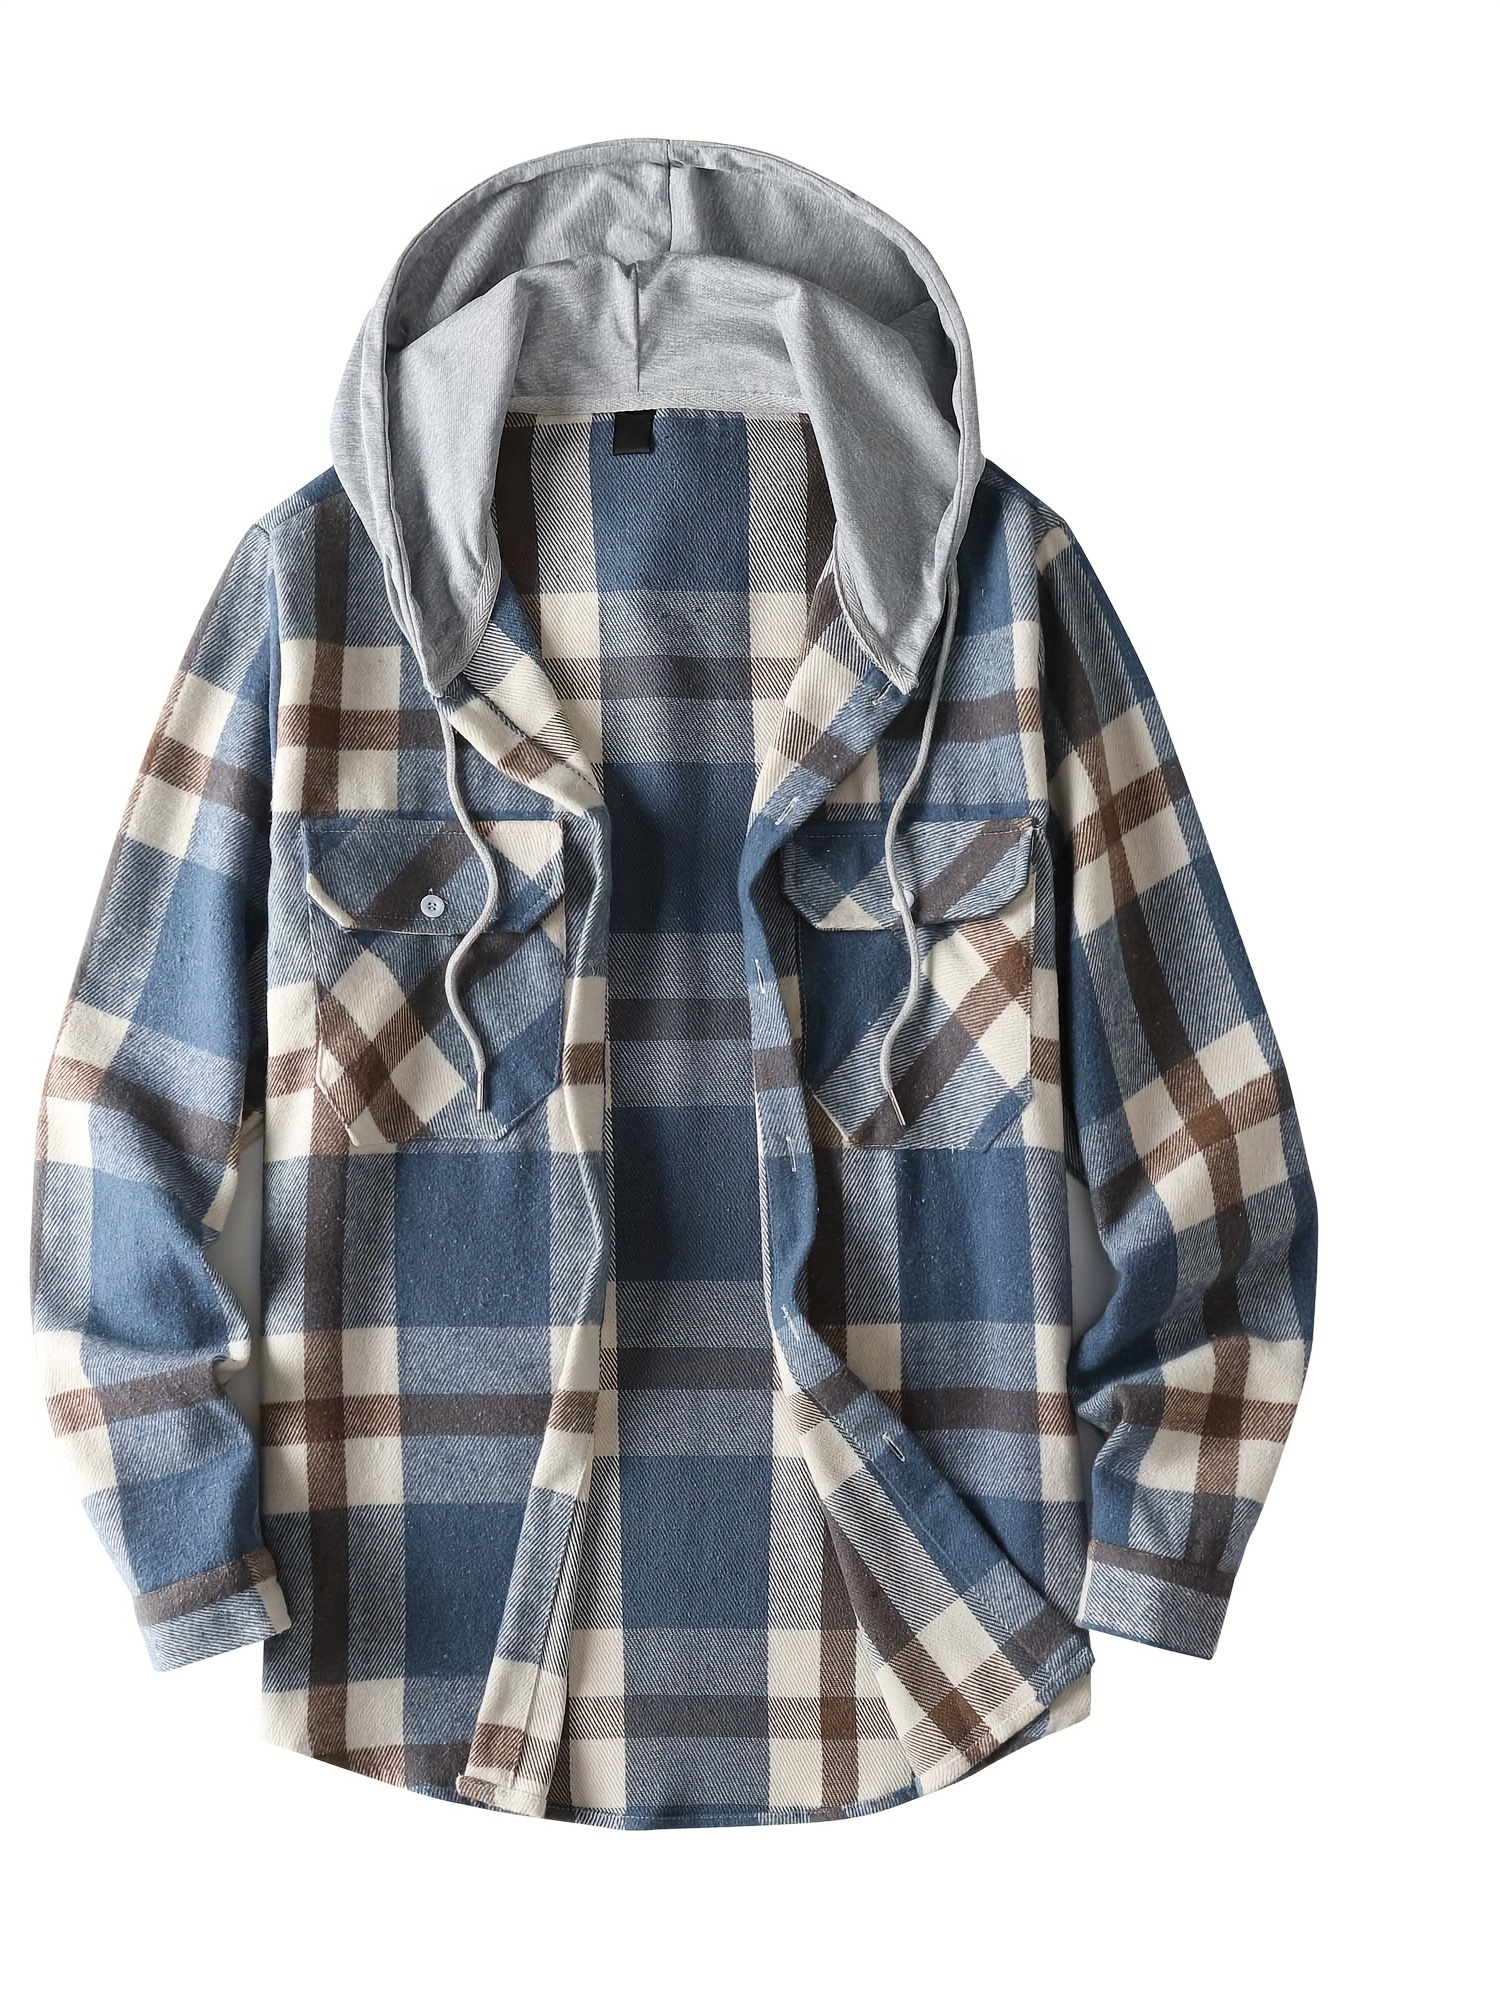 Big Plaid Pattern Men's All-match Long Sleeve Hooded Shirt With Drawstring  For Spring Fall Outdoor